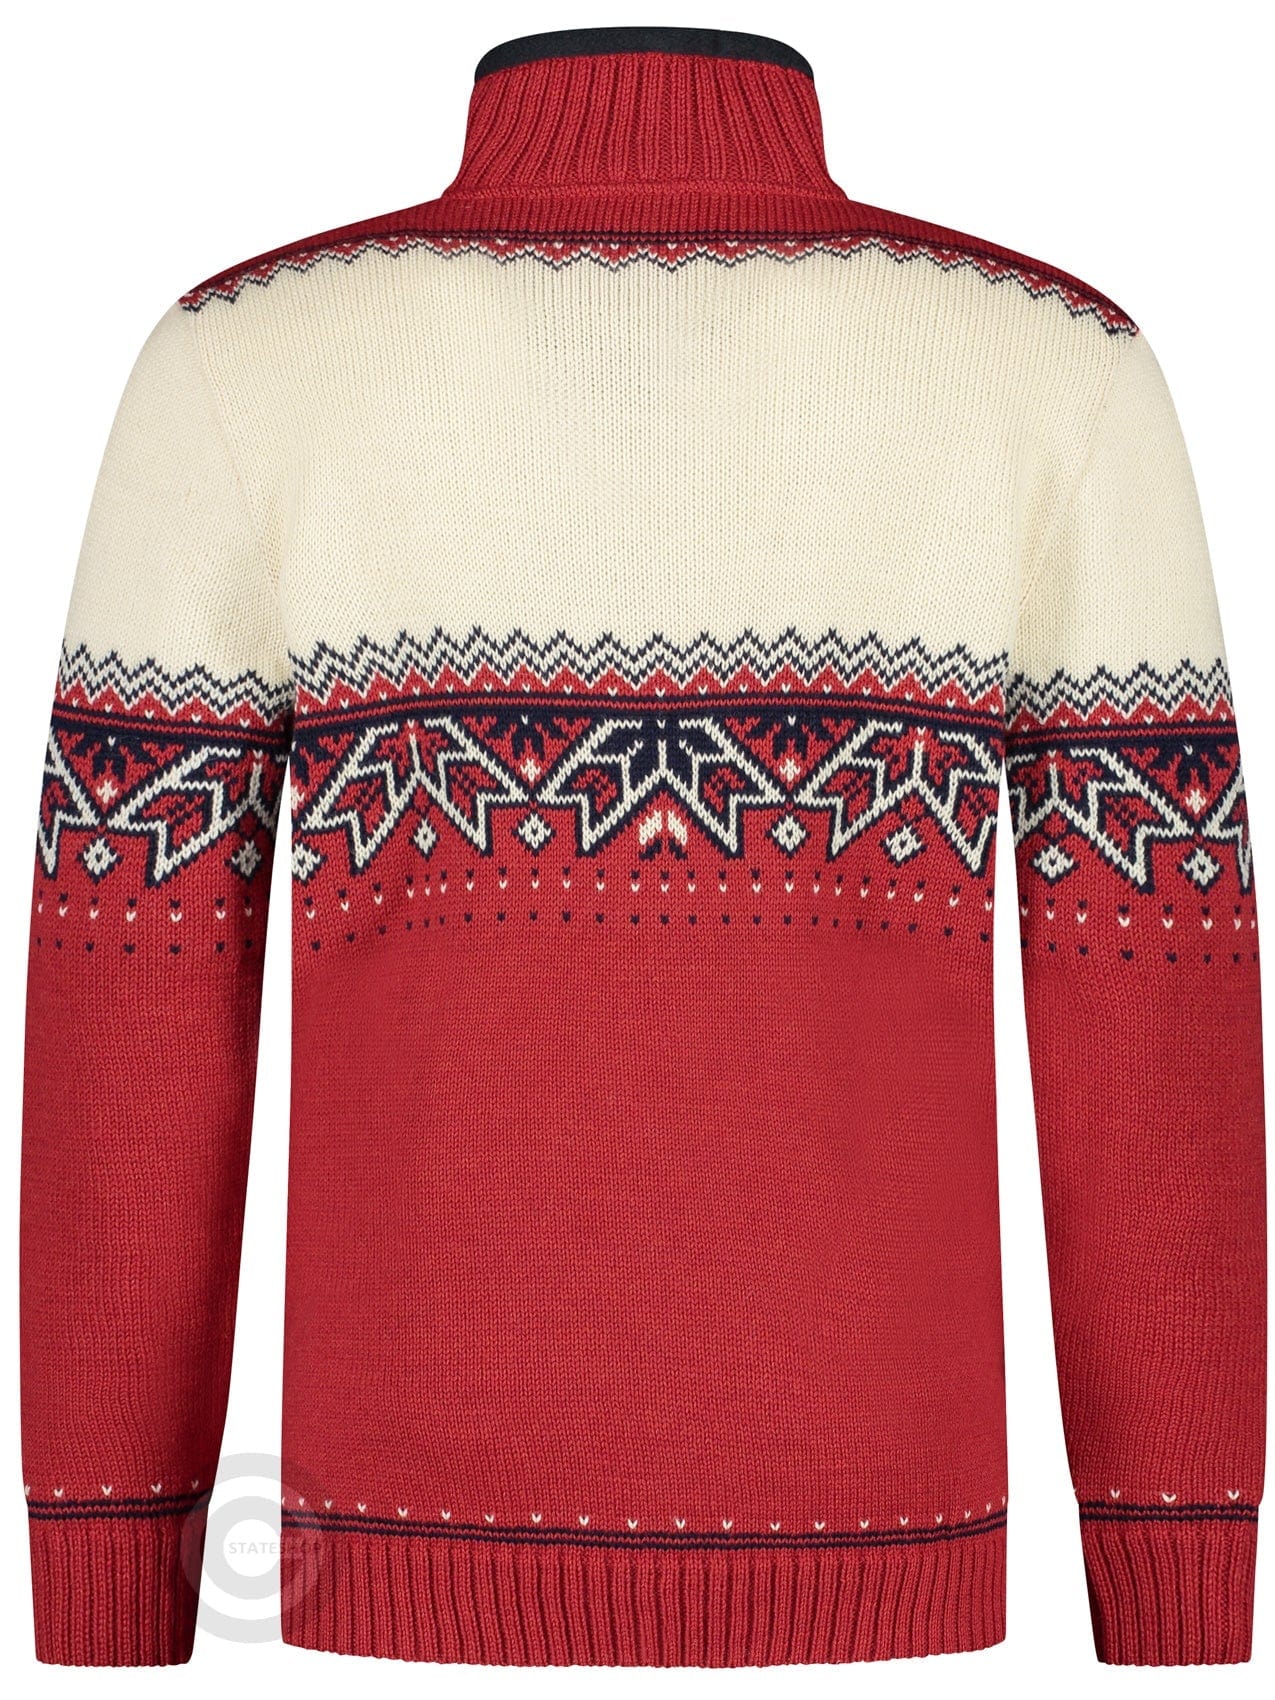 NorfindeNordic sweater with traditional star pattern, red